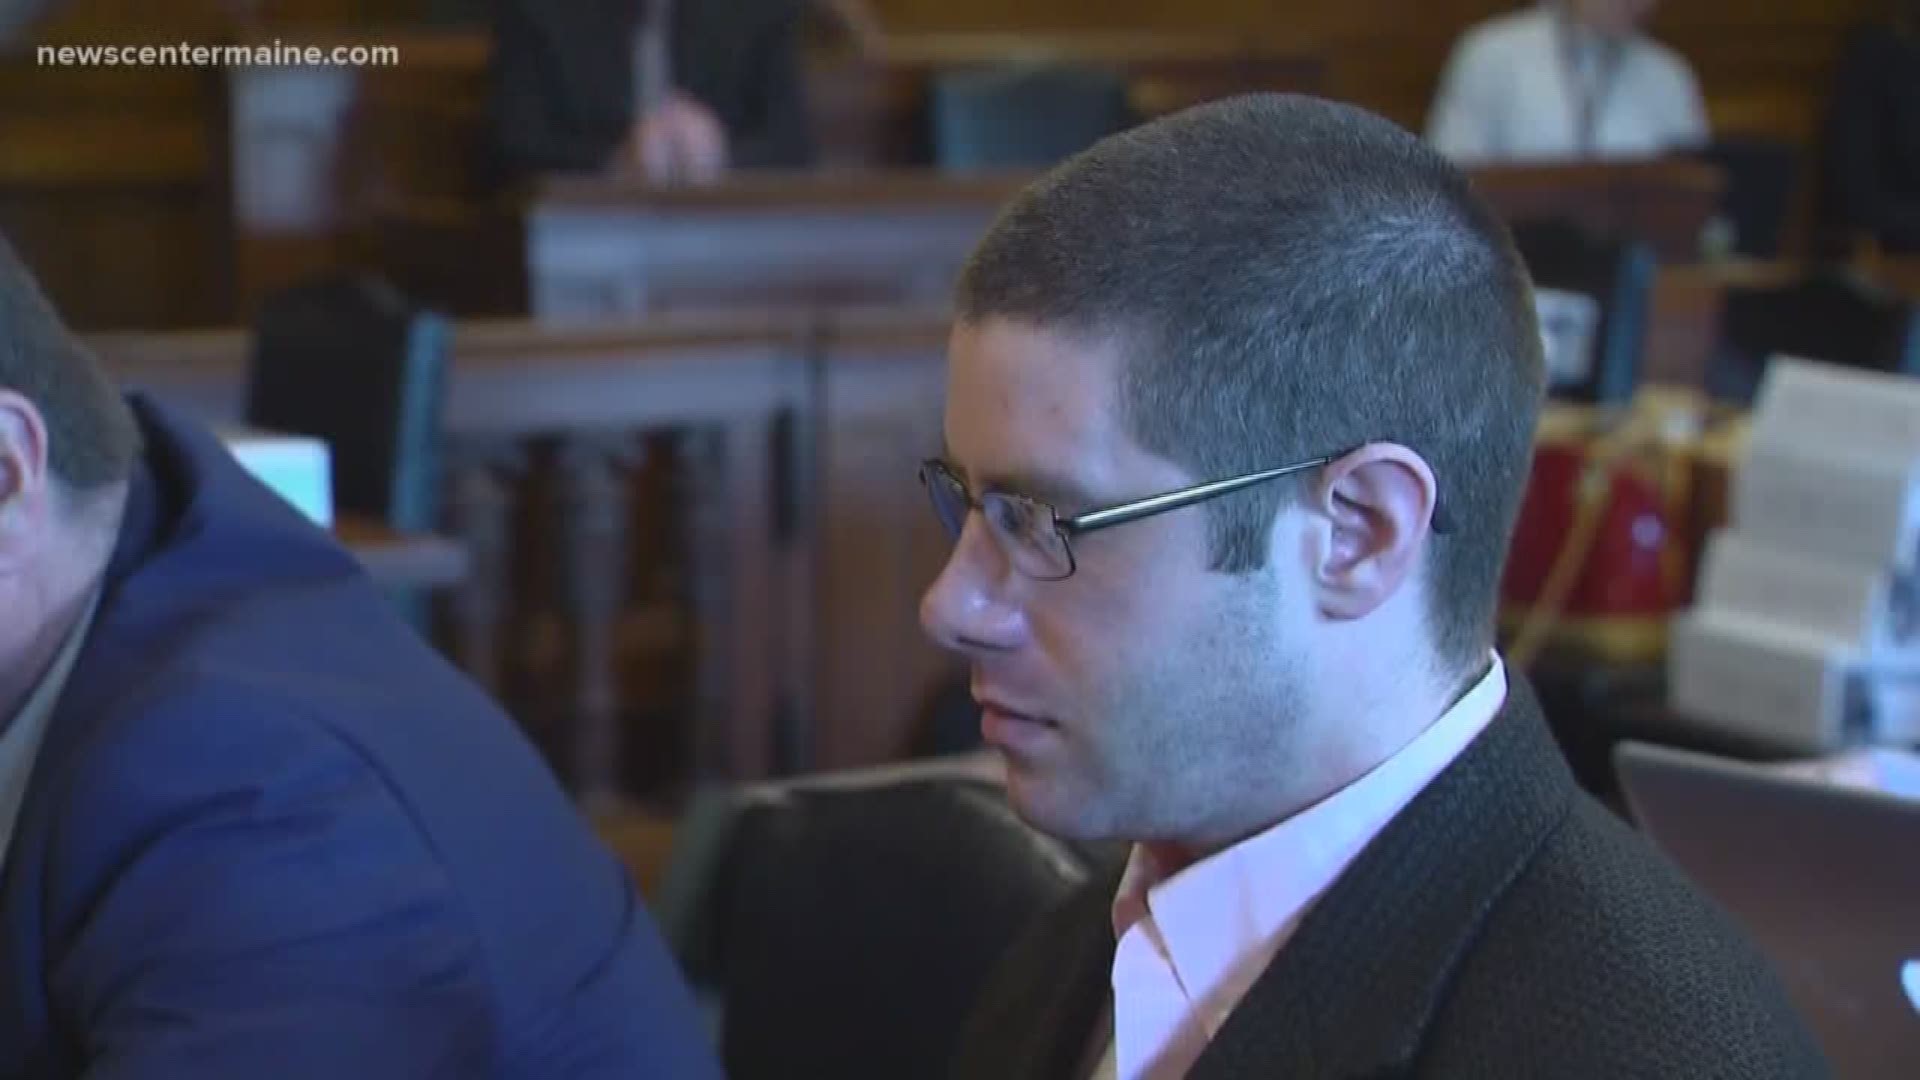 Opening statements in trial for John Williams, accused of murdering Cpl. Eugene Cole